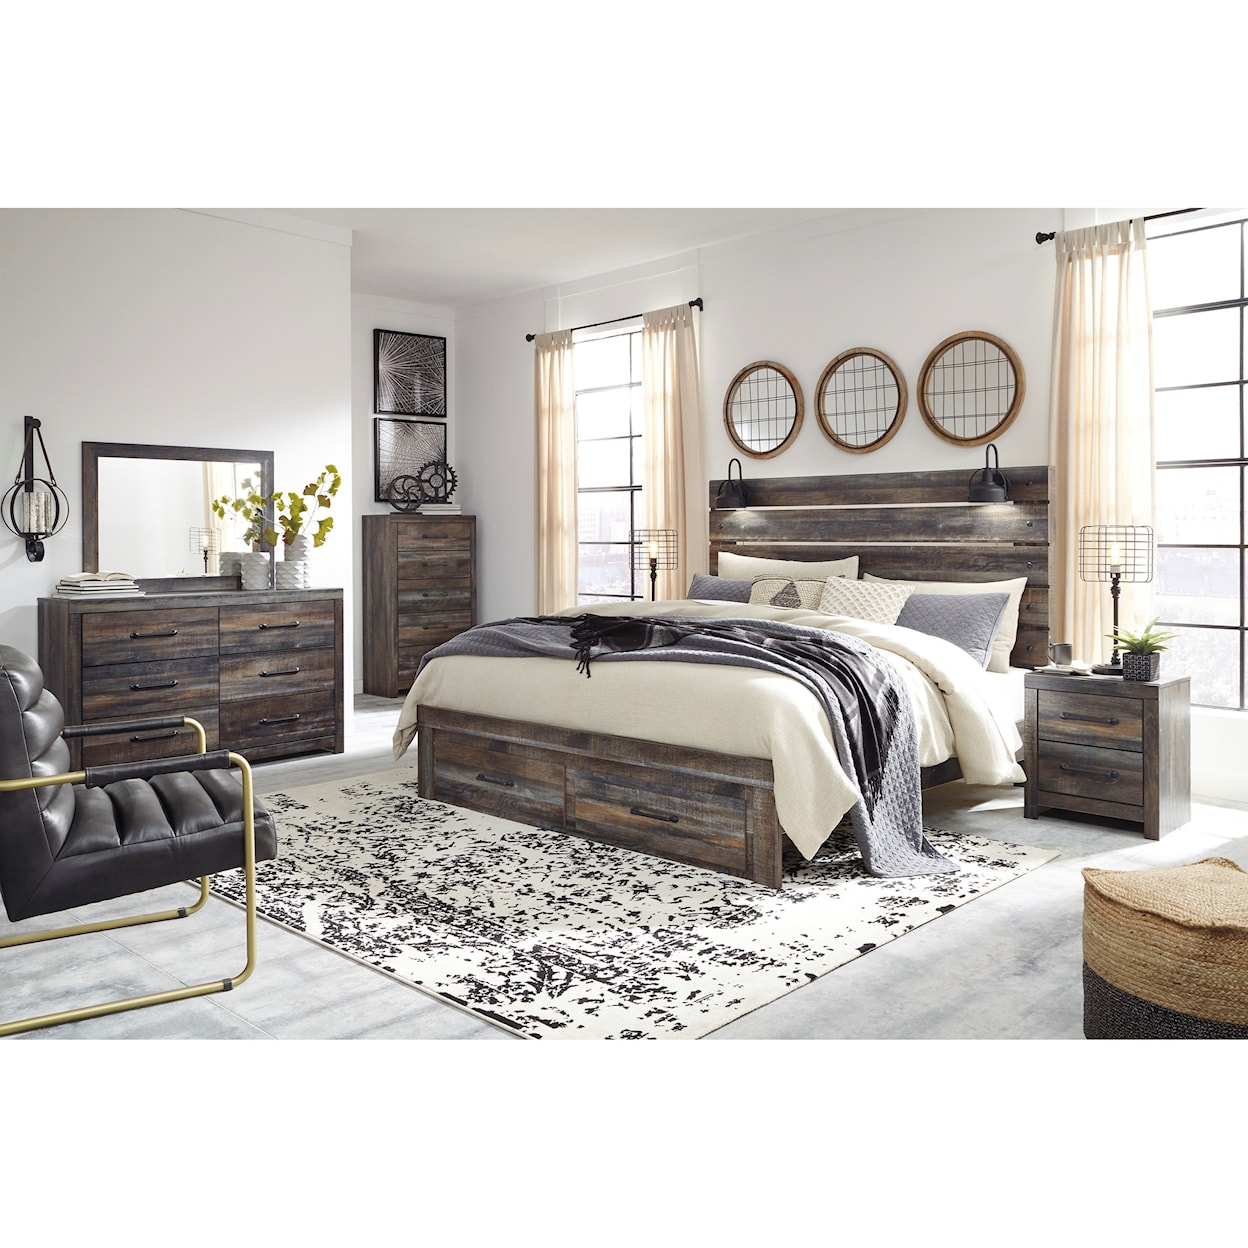 Signature Design by Ashley Drystan King Bedroom Group